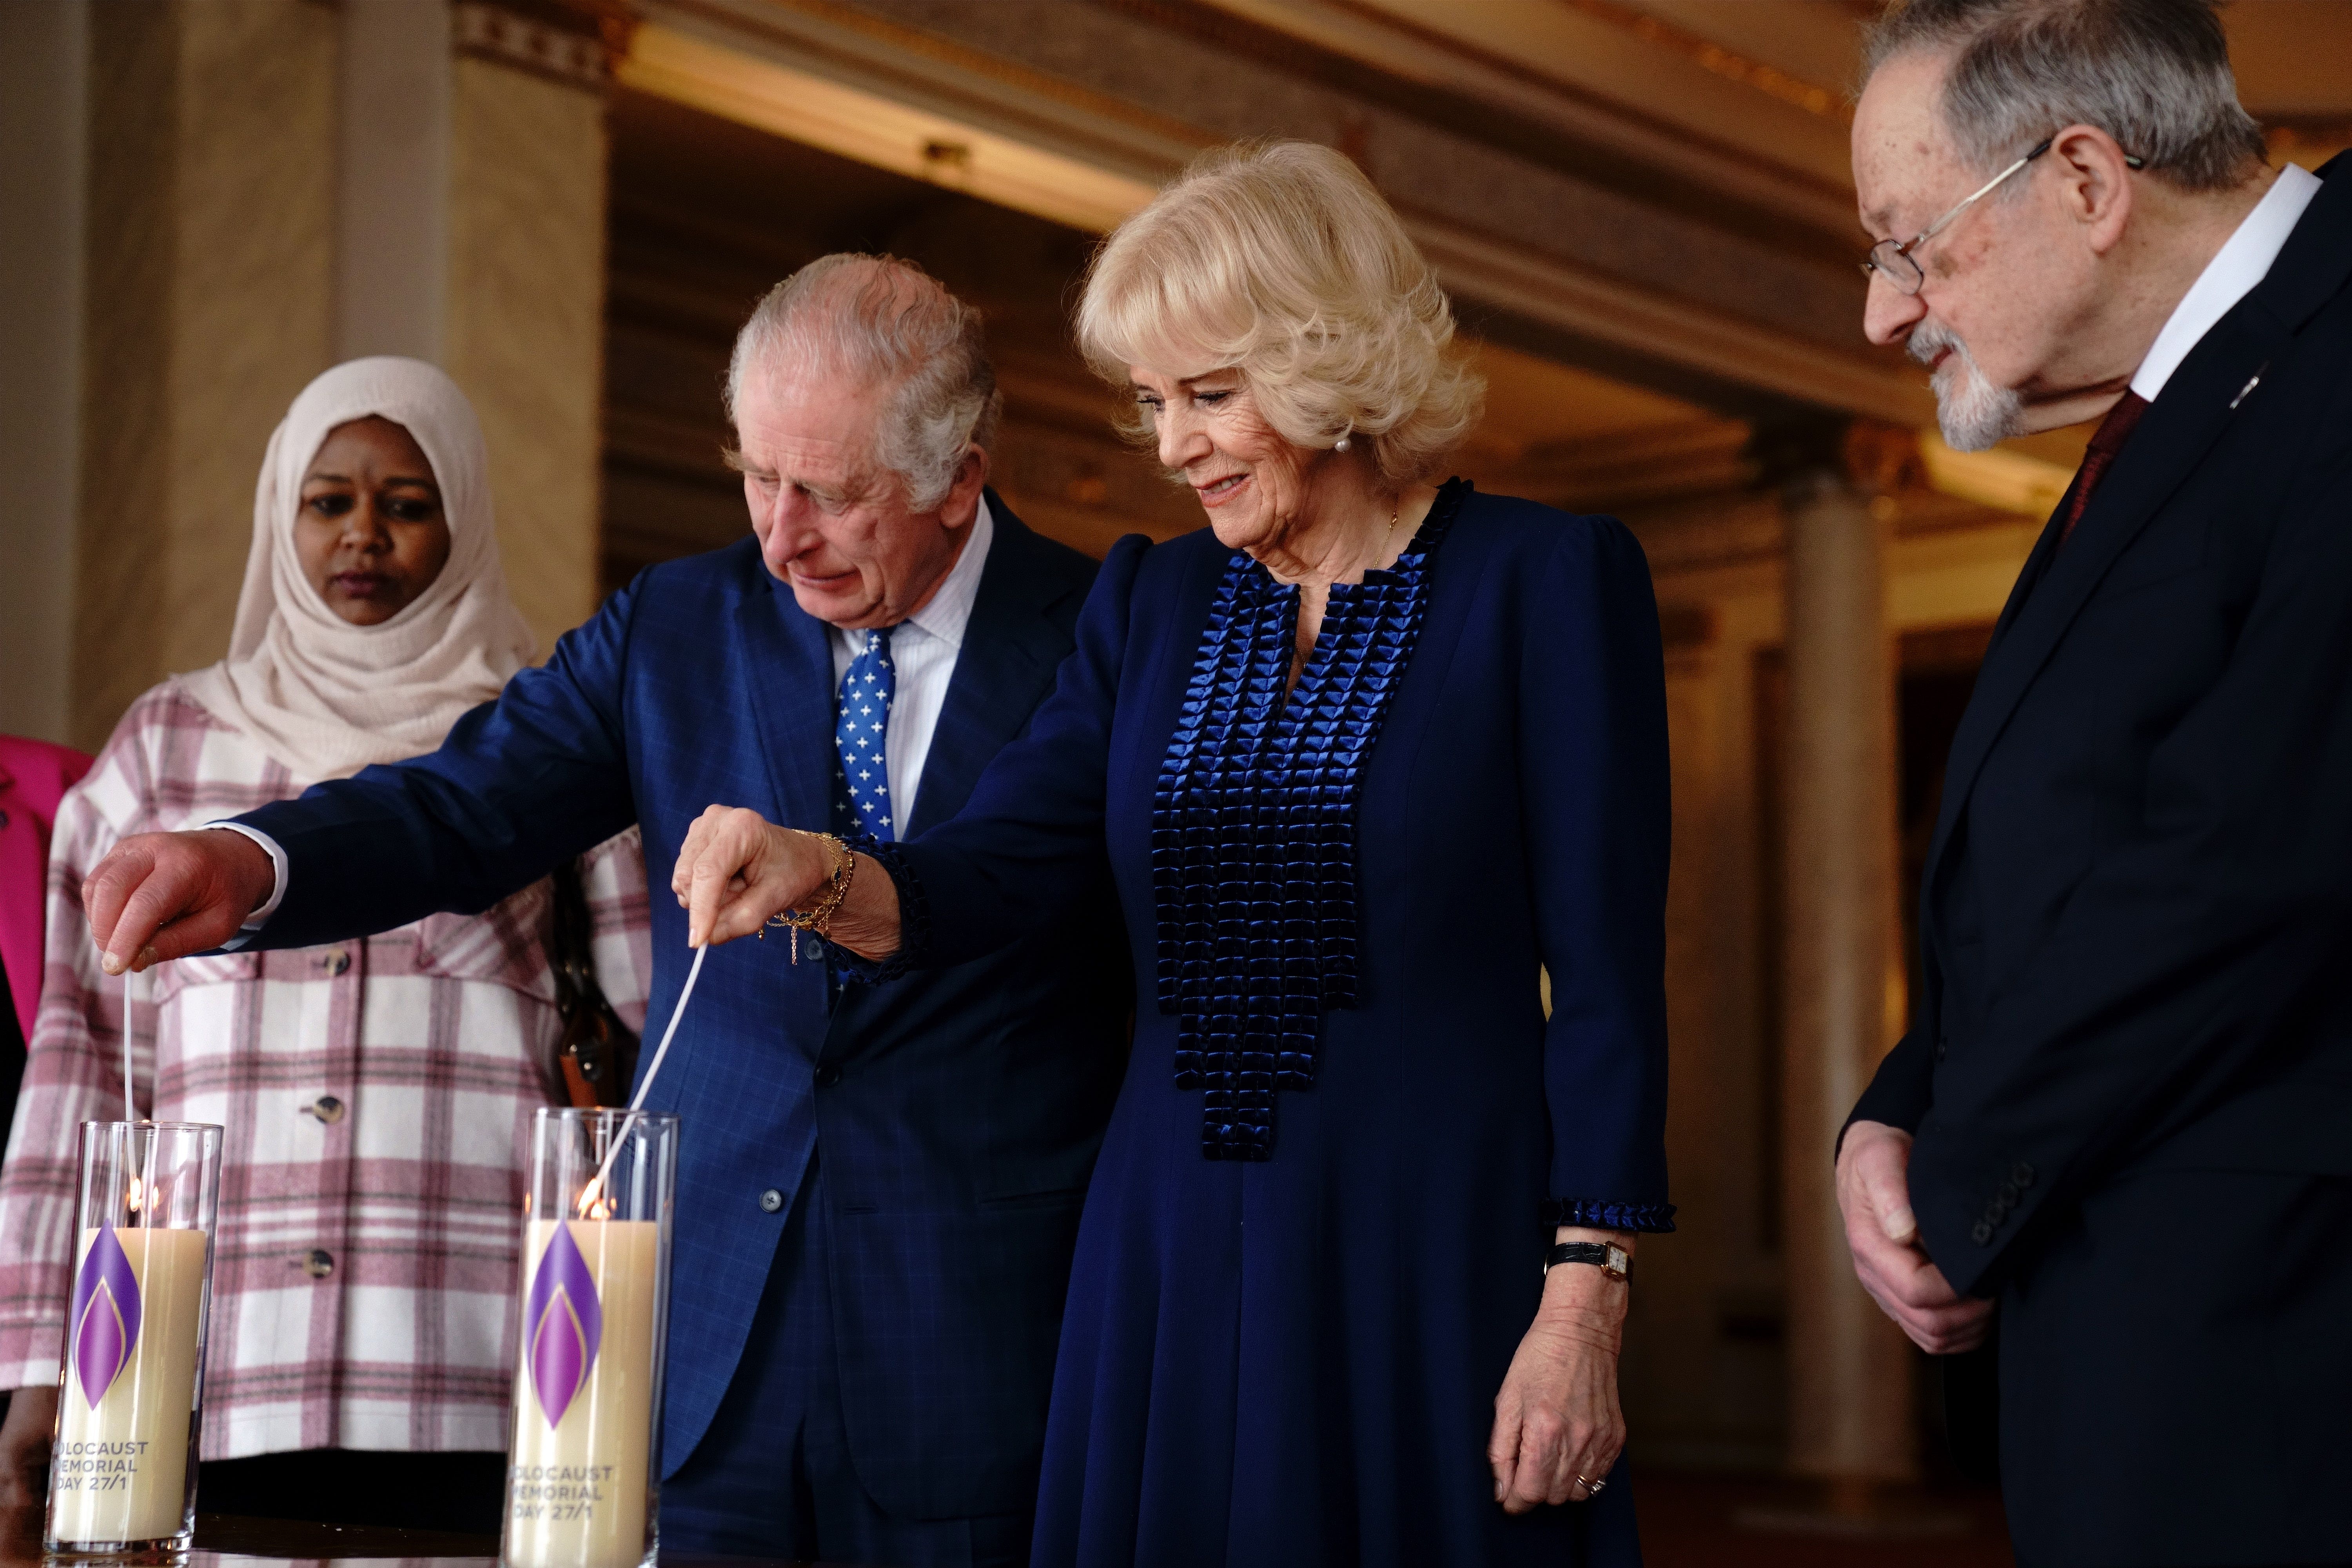 The King and the Queen Consort light a candle at Buckingham Palace to mark Holocaust Memorial Da (Victoria Jones/PA)